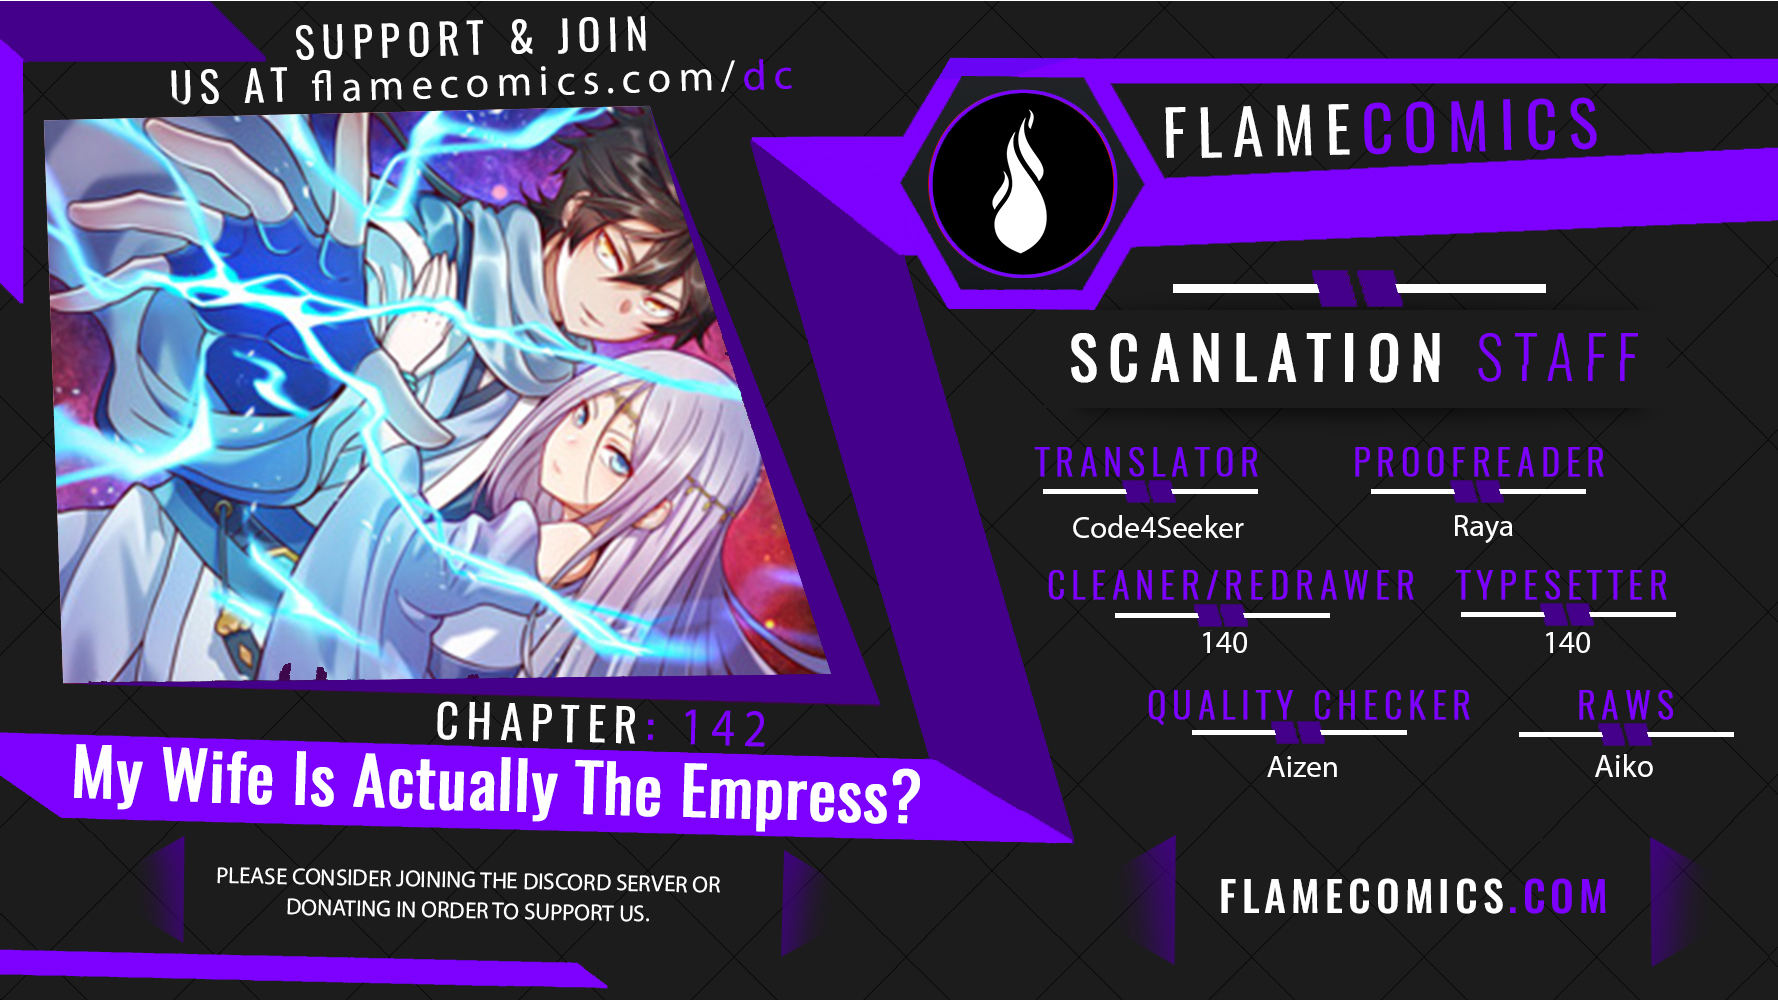 My Wife Is Actually The Empress? - Chapter 31851 - Image 1